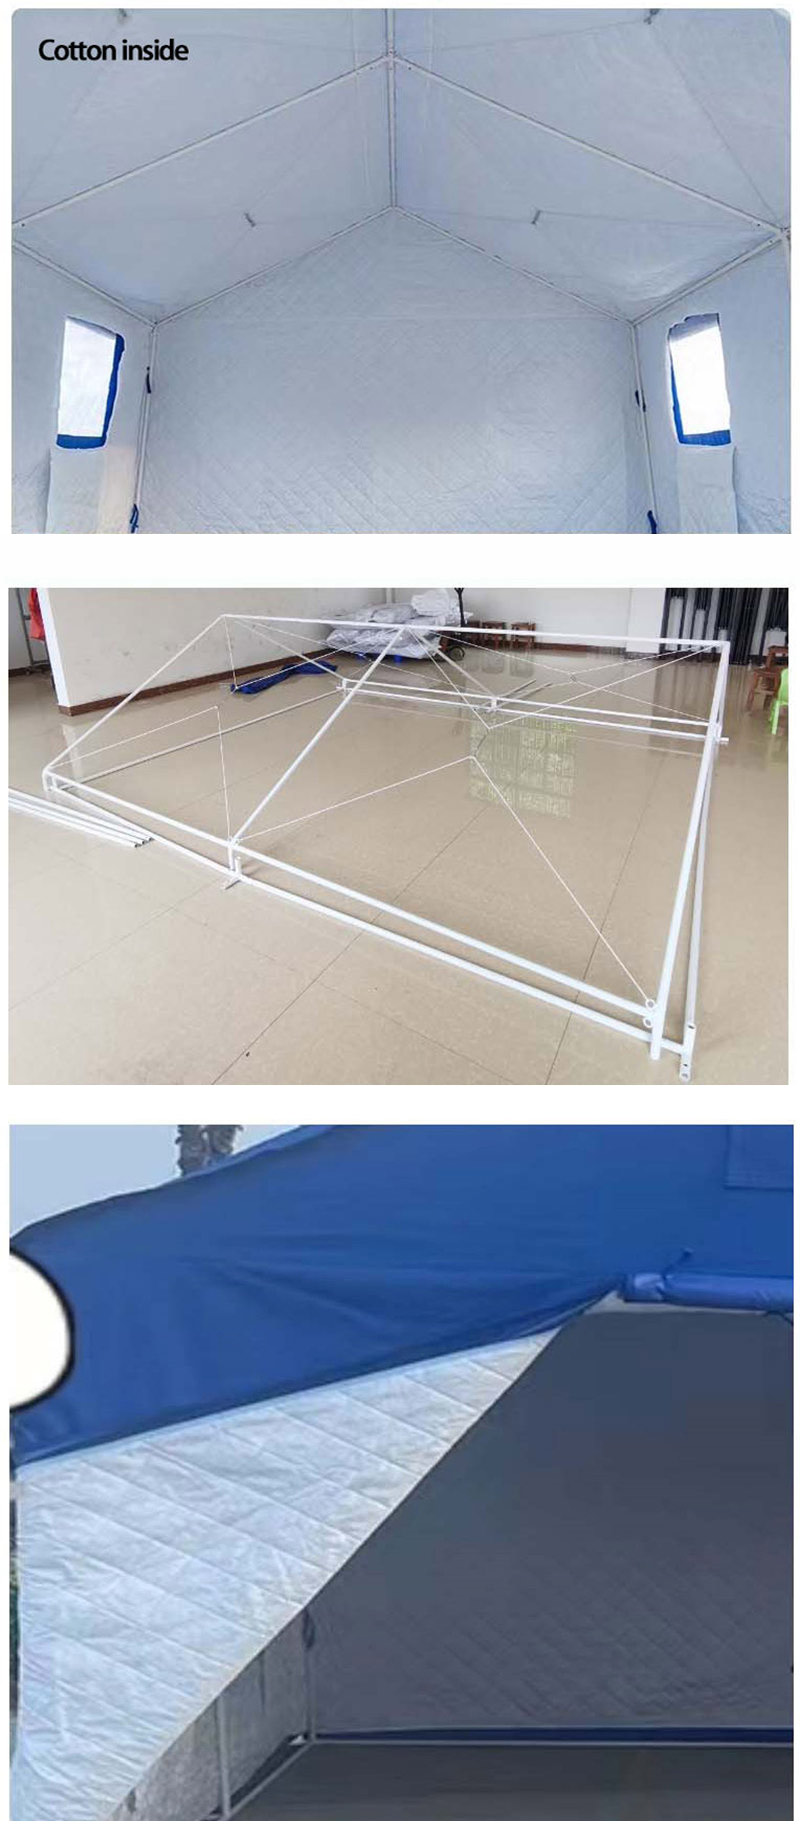 Mechanically operated hard shell roof tent